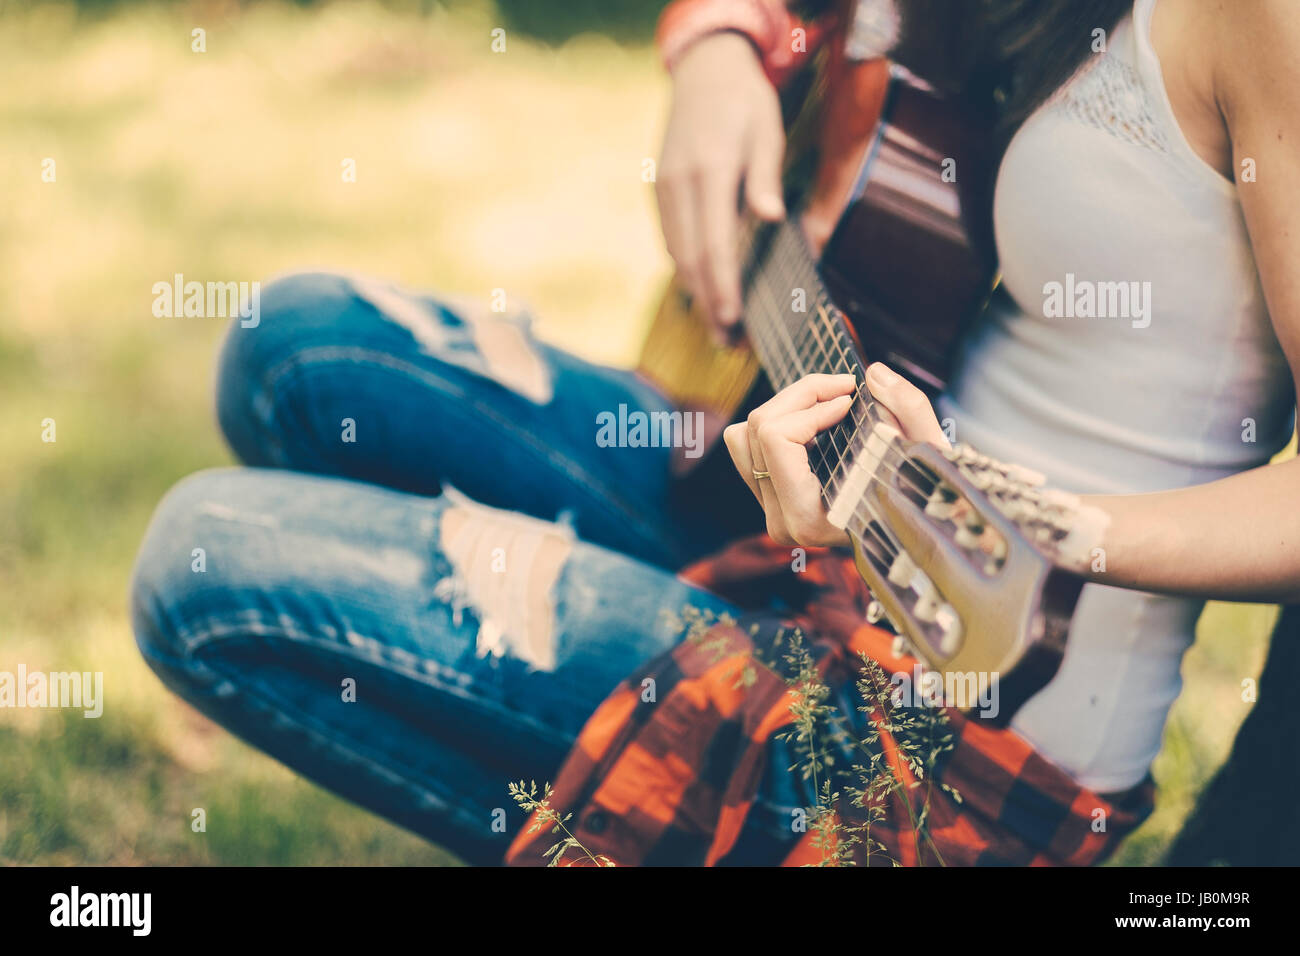 Festival woman with guitar at party Stock Photo